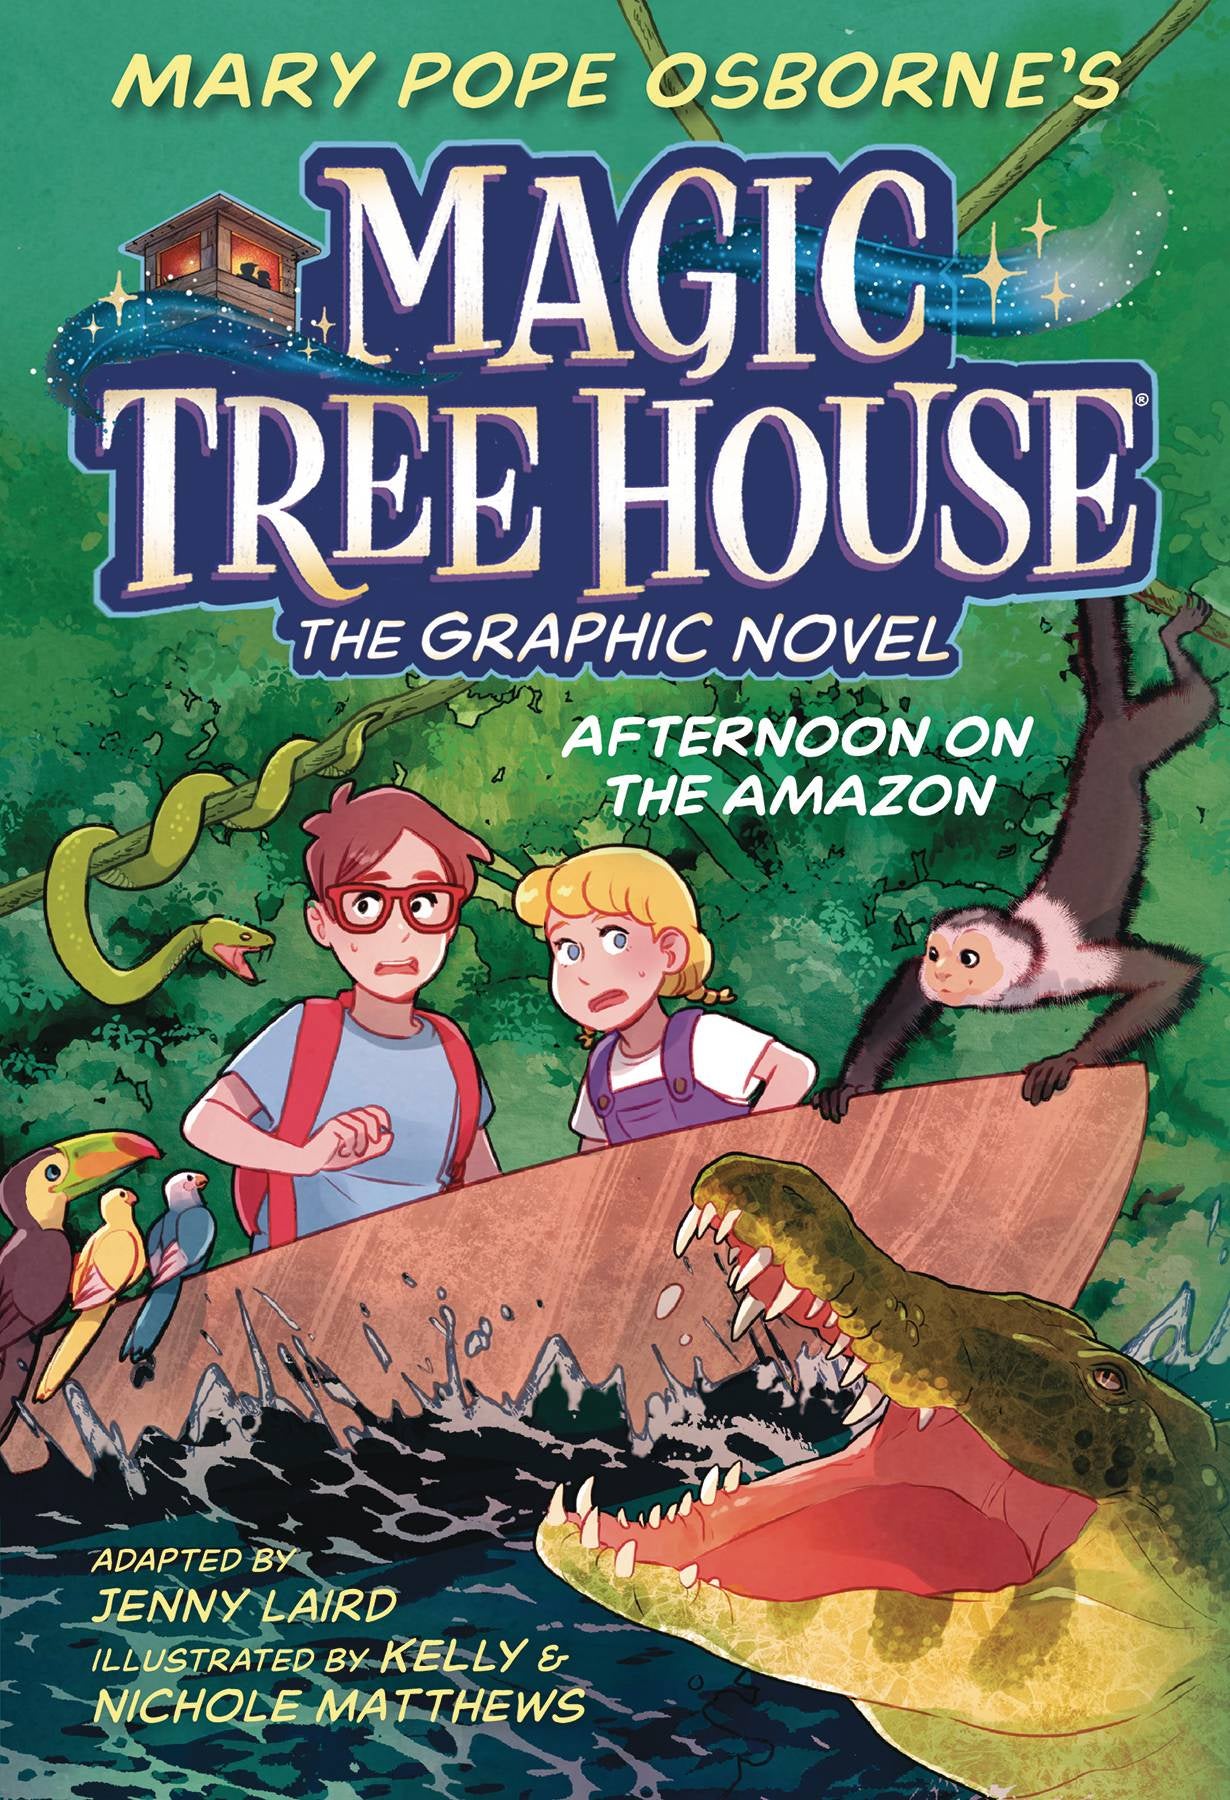 MAGIC TREE HOUSE AFTERNOON ON THE AMAZON